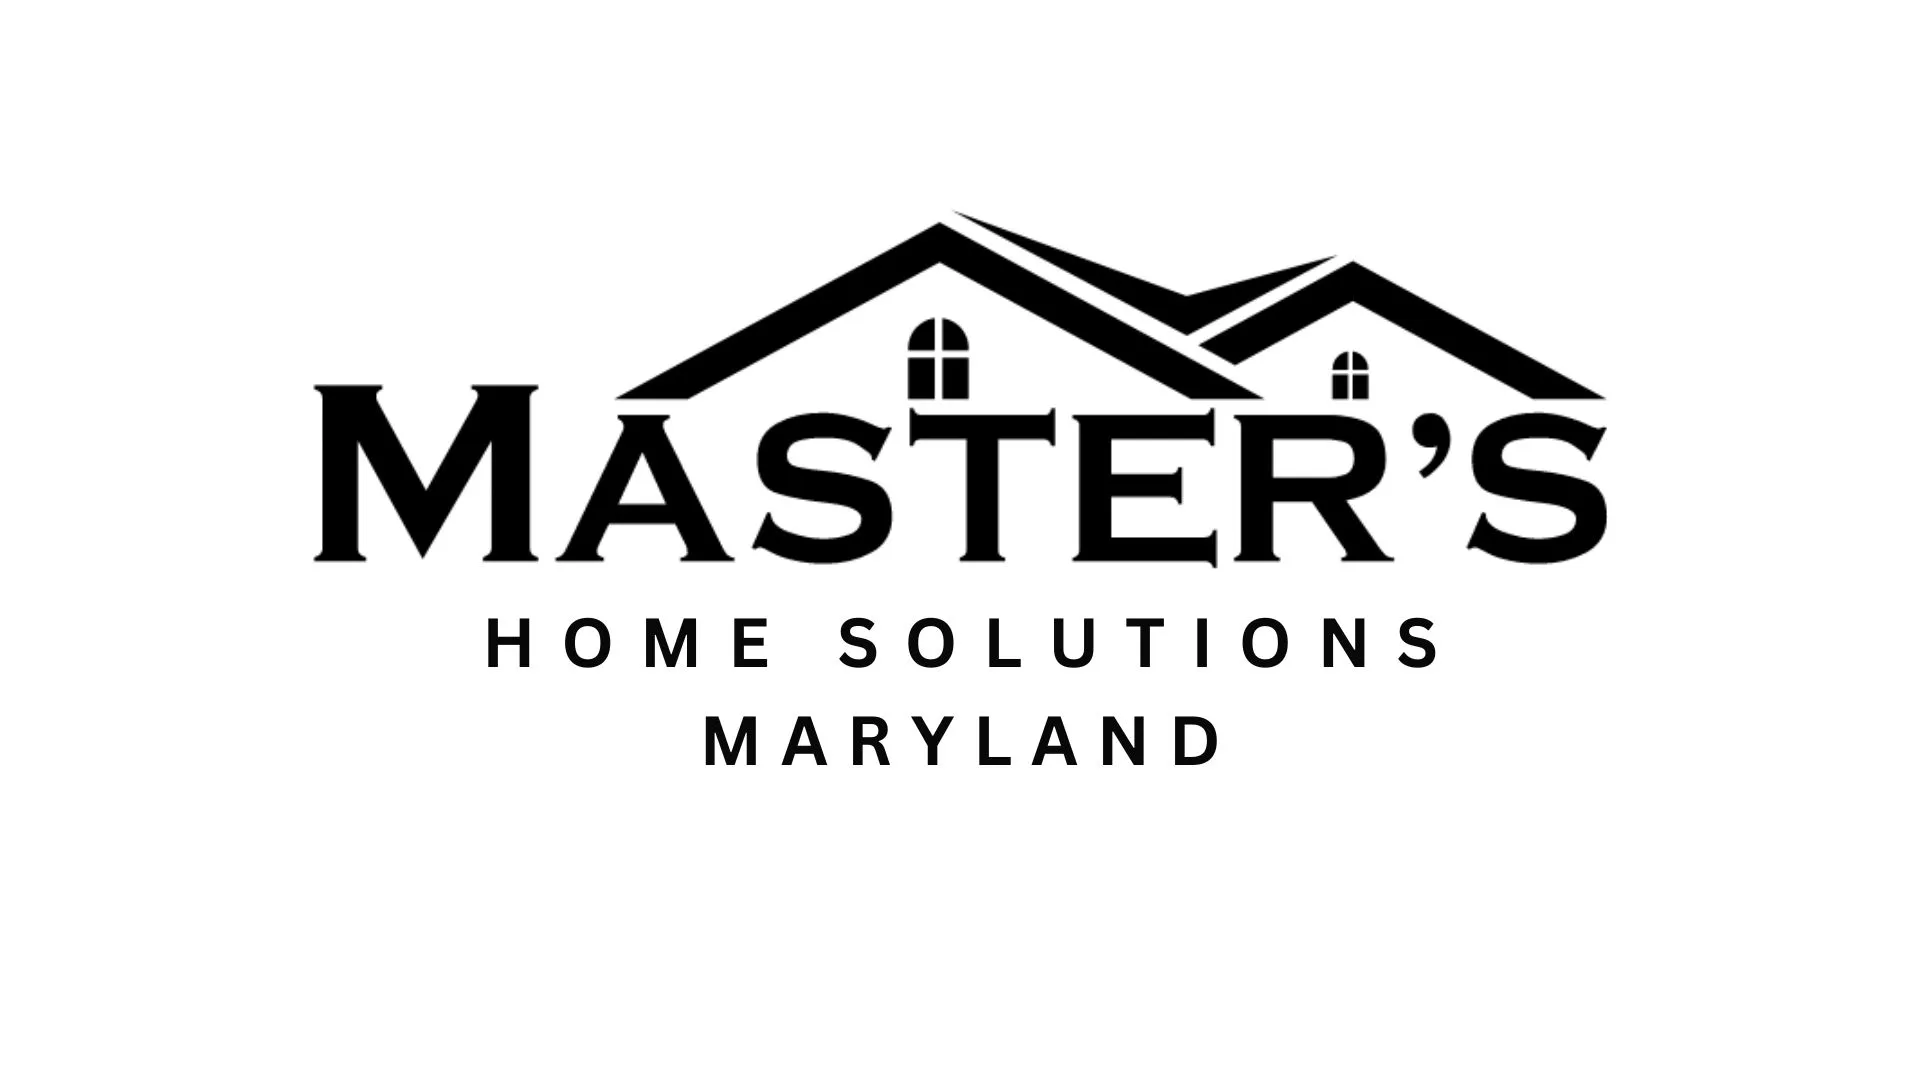 MASTERS HOME SOLUTIONS IN MARYLAND (2)